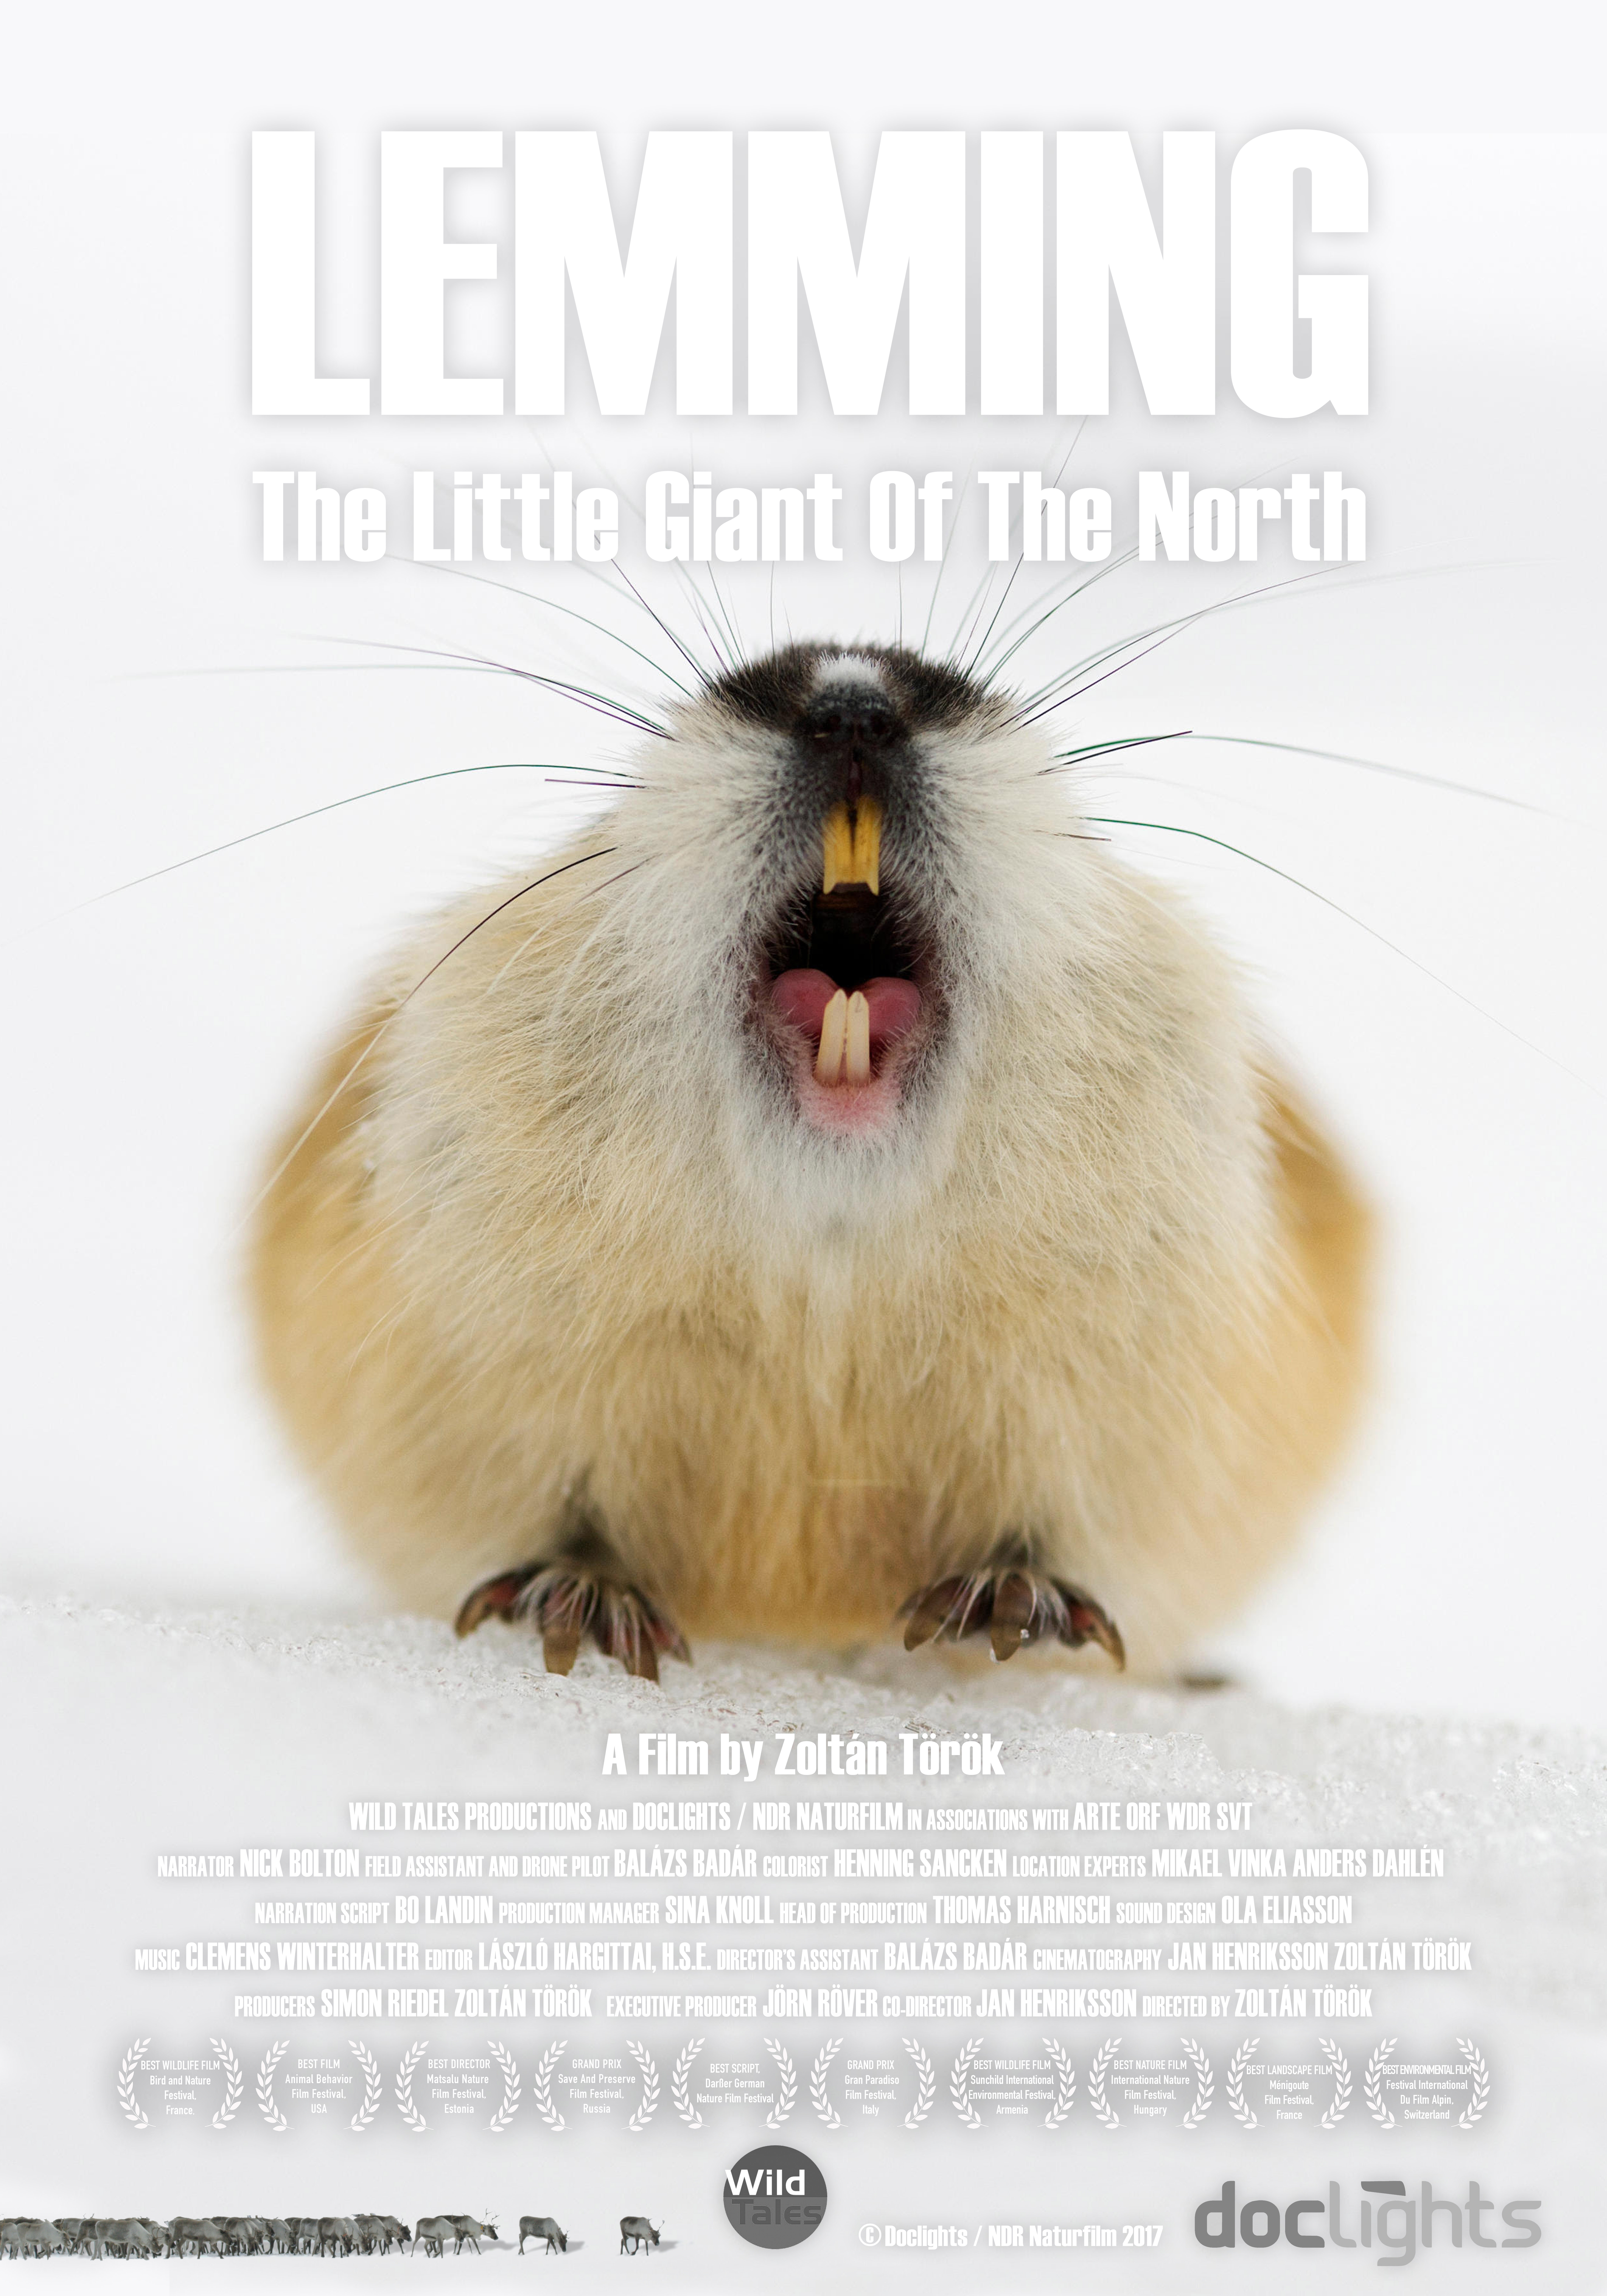 Lemming, the little giant of the North (2017)